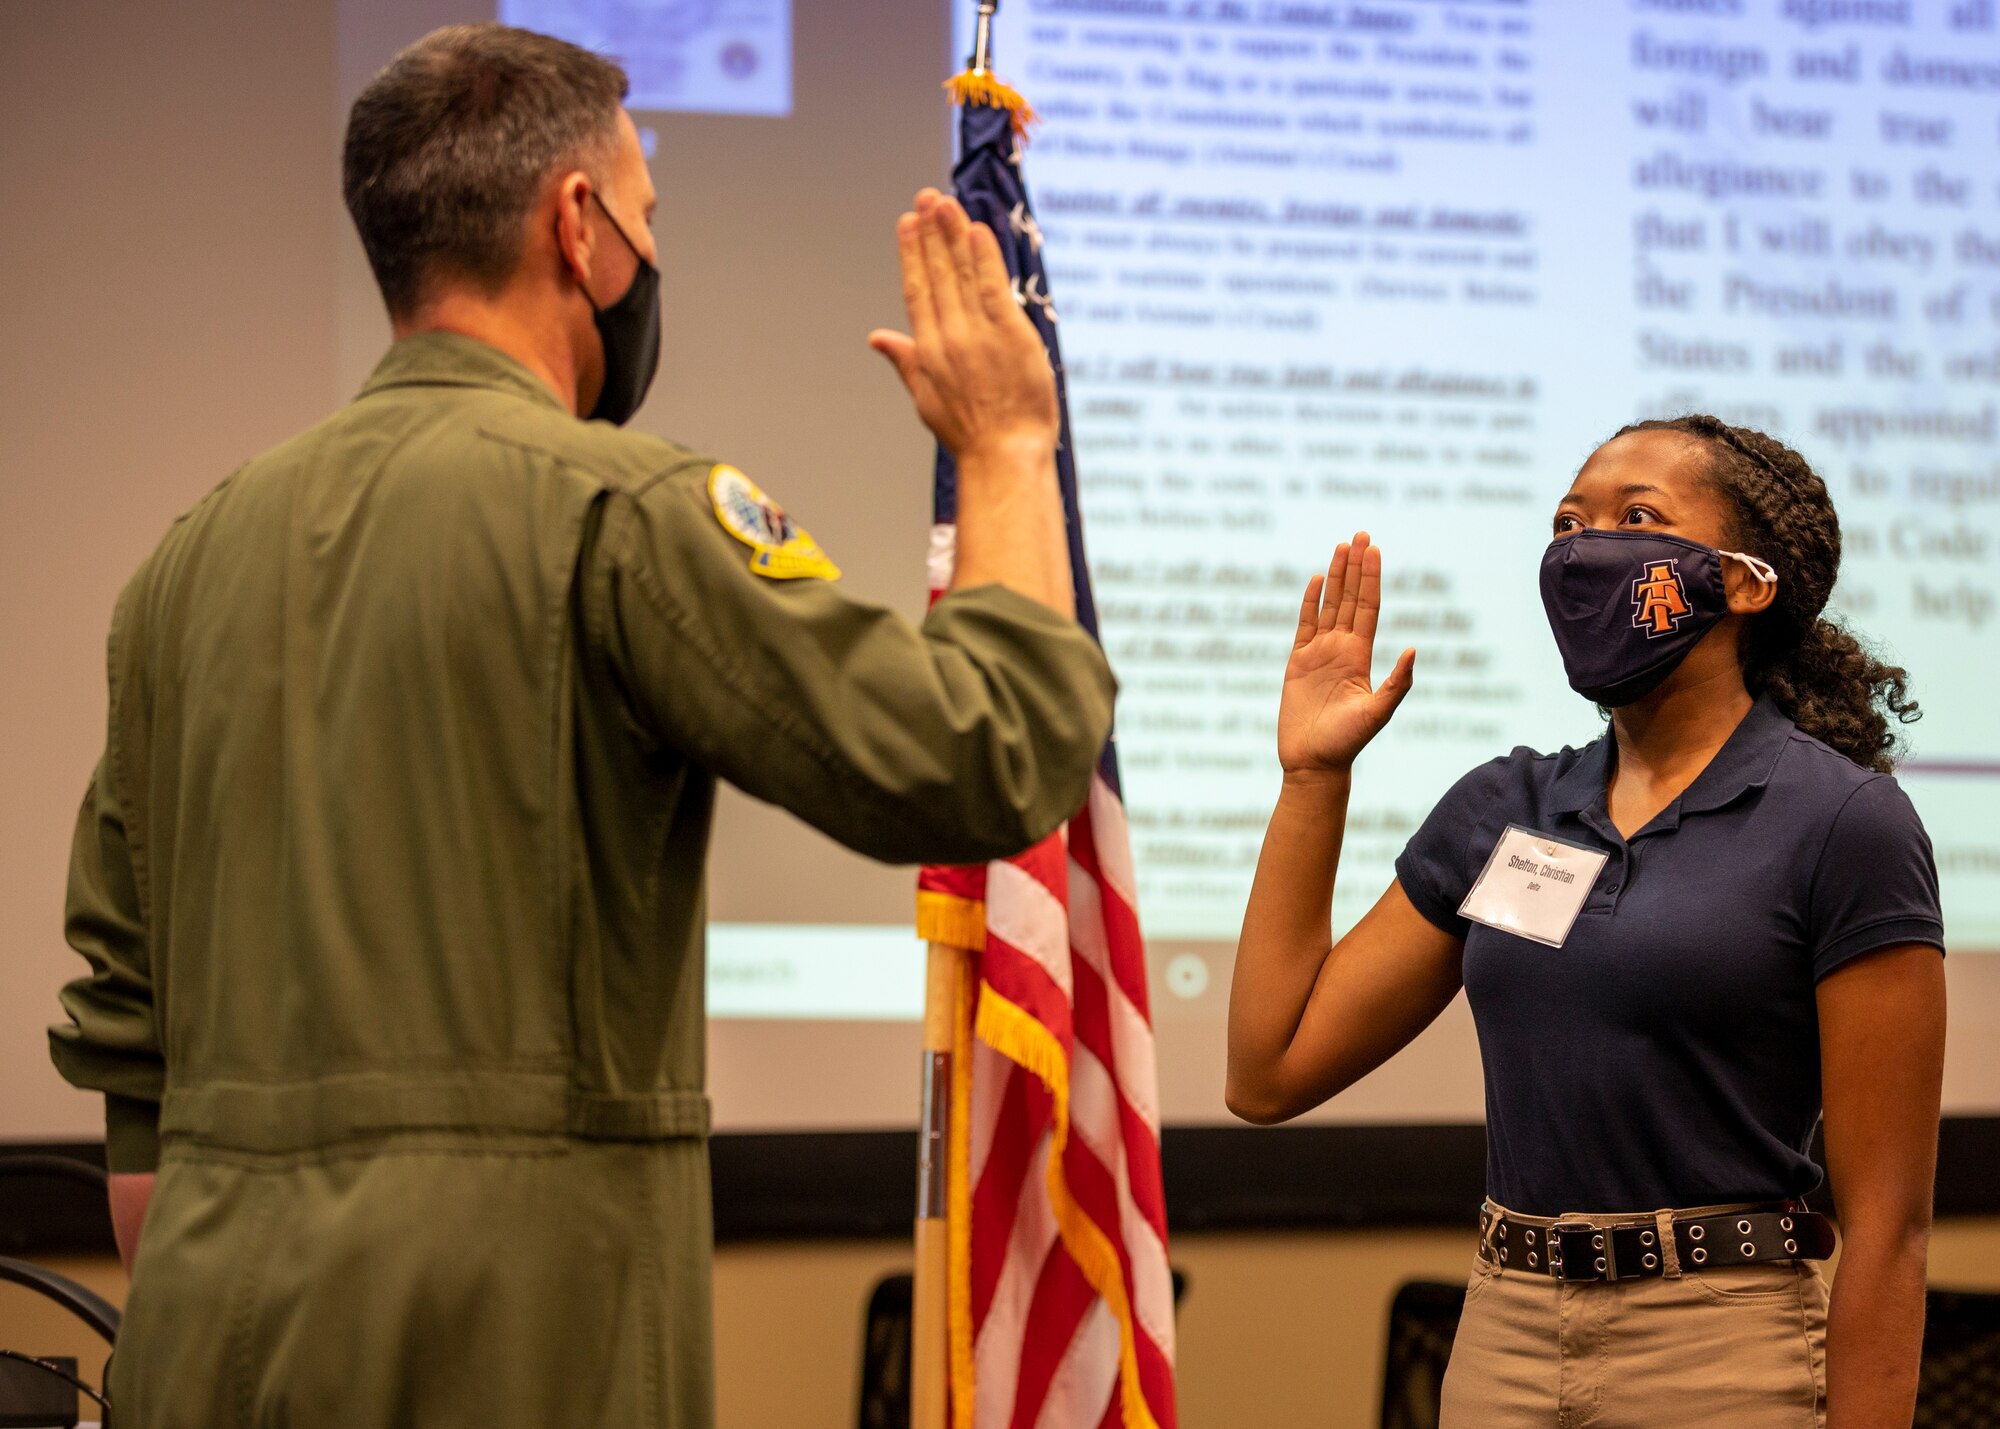 Air Force ROTC cadet Christina Shelton, North Carolina Agricultural and Technical State University detachment 605, takes the oath of enlistment at N.C. A&T University, Oct. 28, 2021.